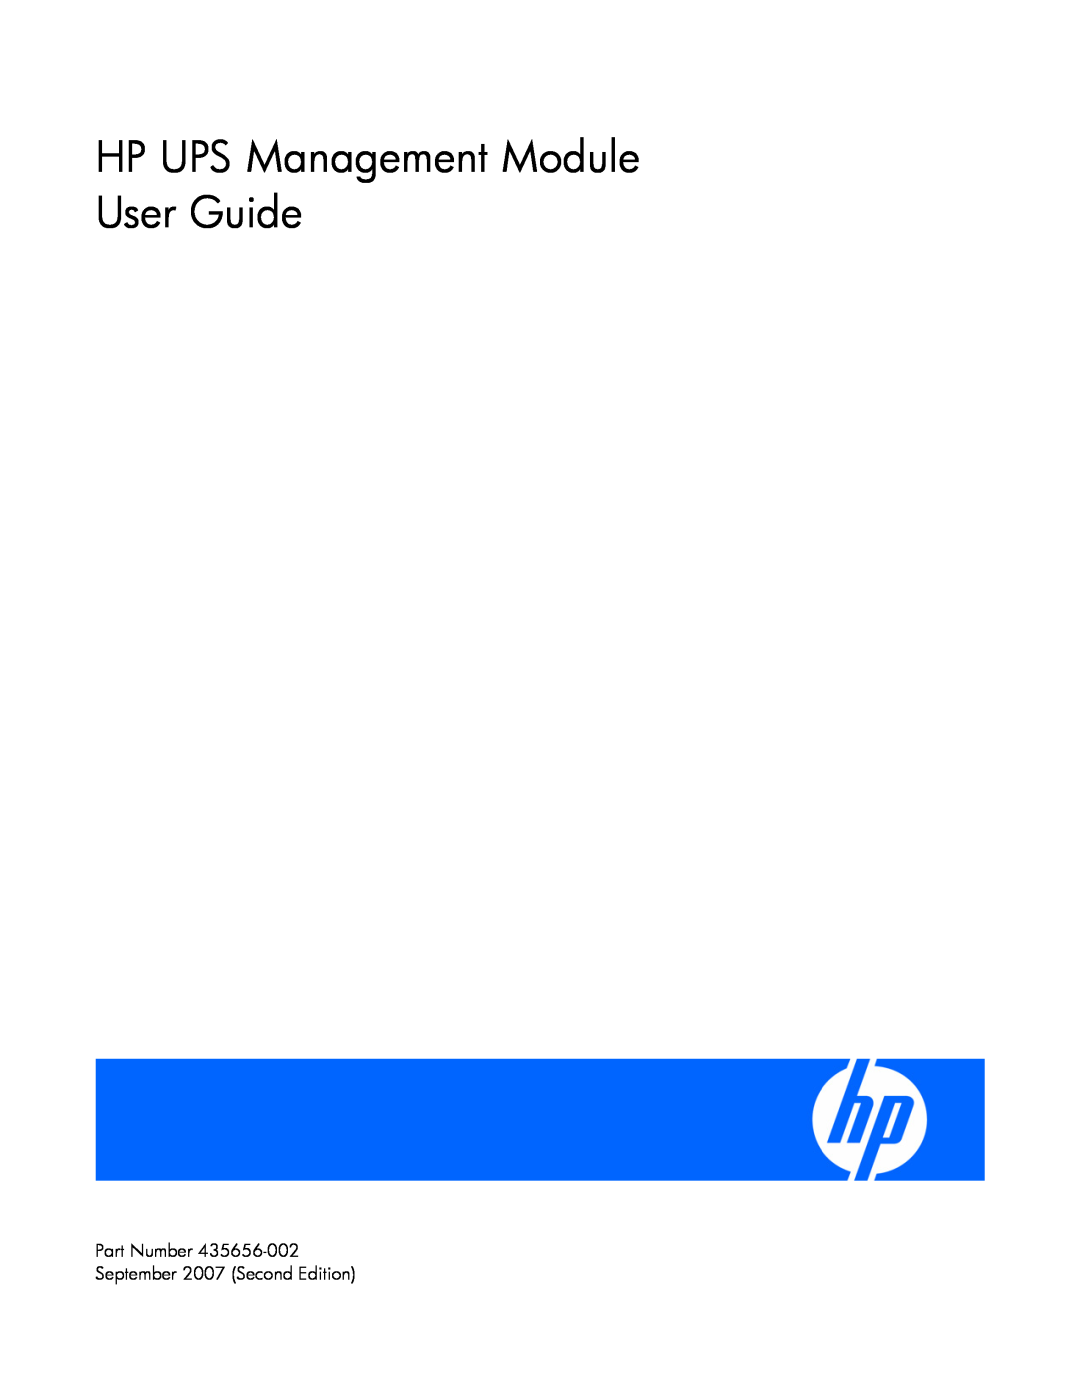 HP A1354A, A6584A, A1353A, A1356A manual HP UPS Management Module User Guide, Part Number September 2007 Second Edition 